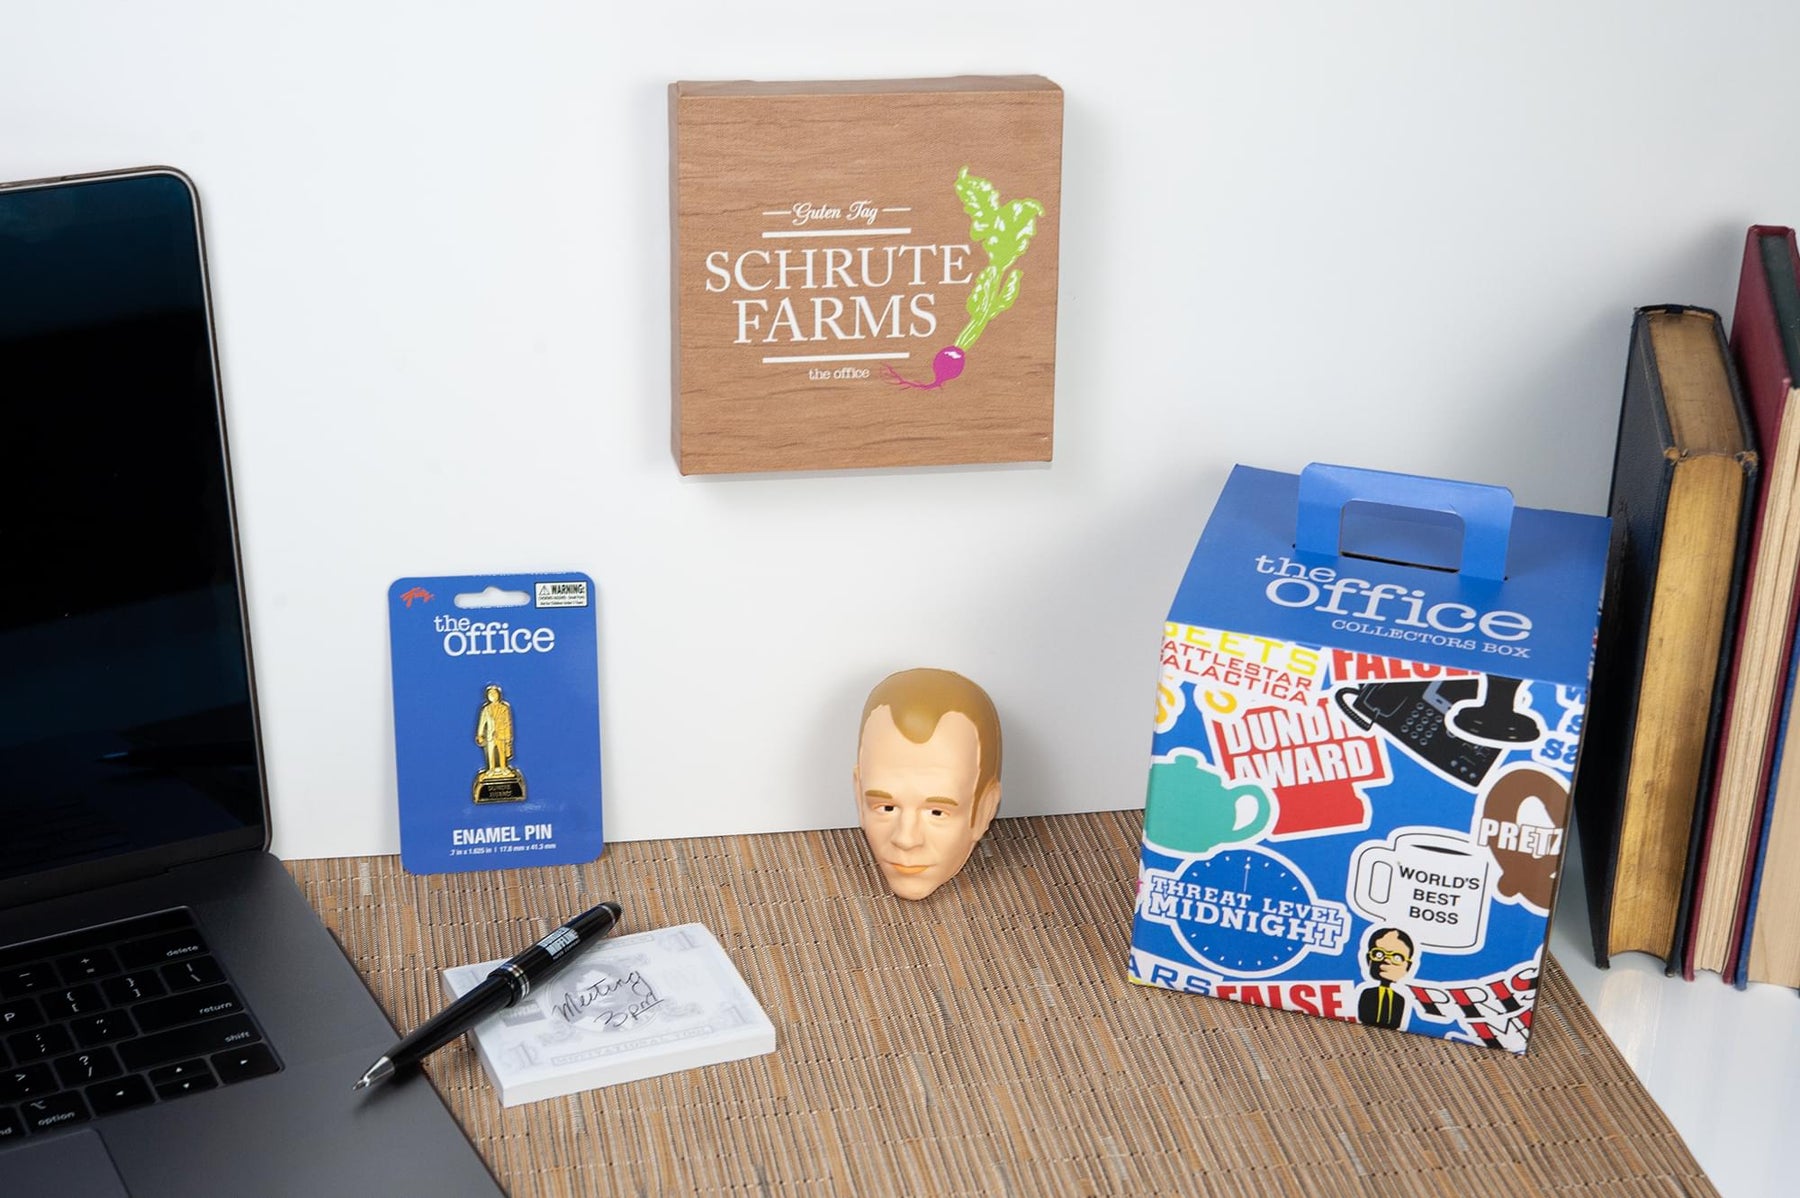 The Office Dunder Mifflin Collector Looksee Box | Includes 5 Themed Collectibles